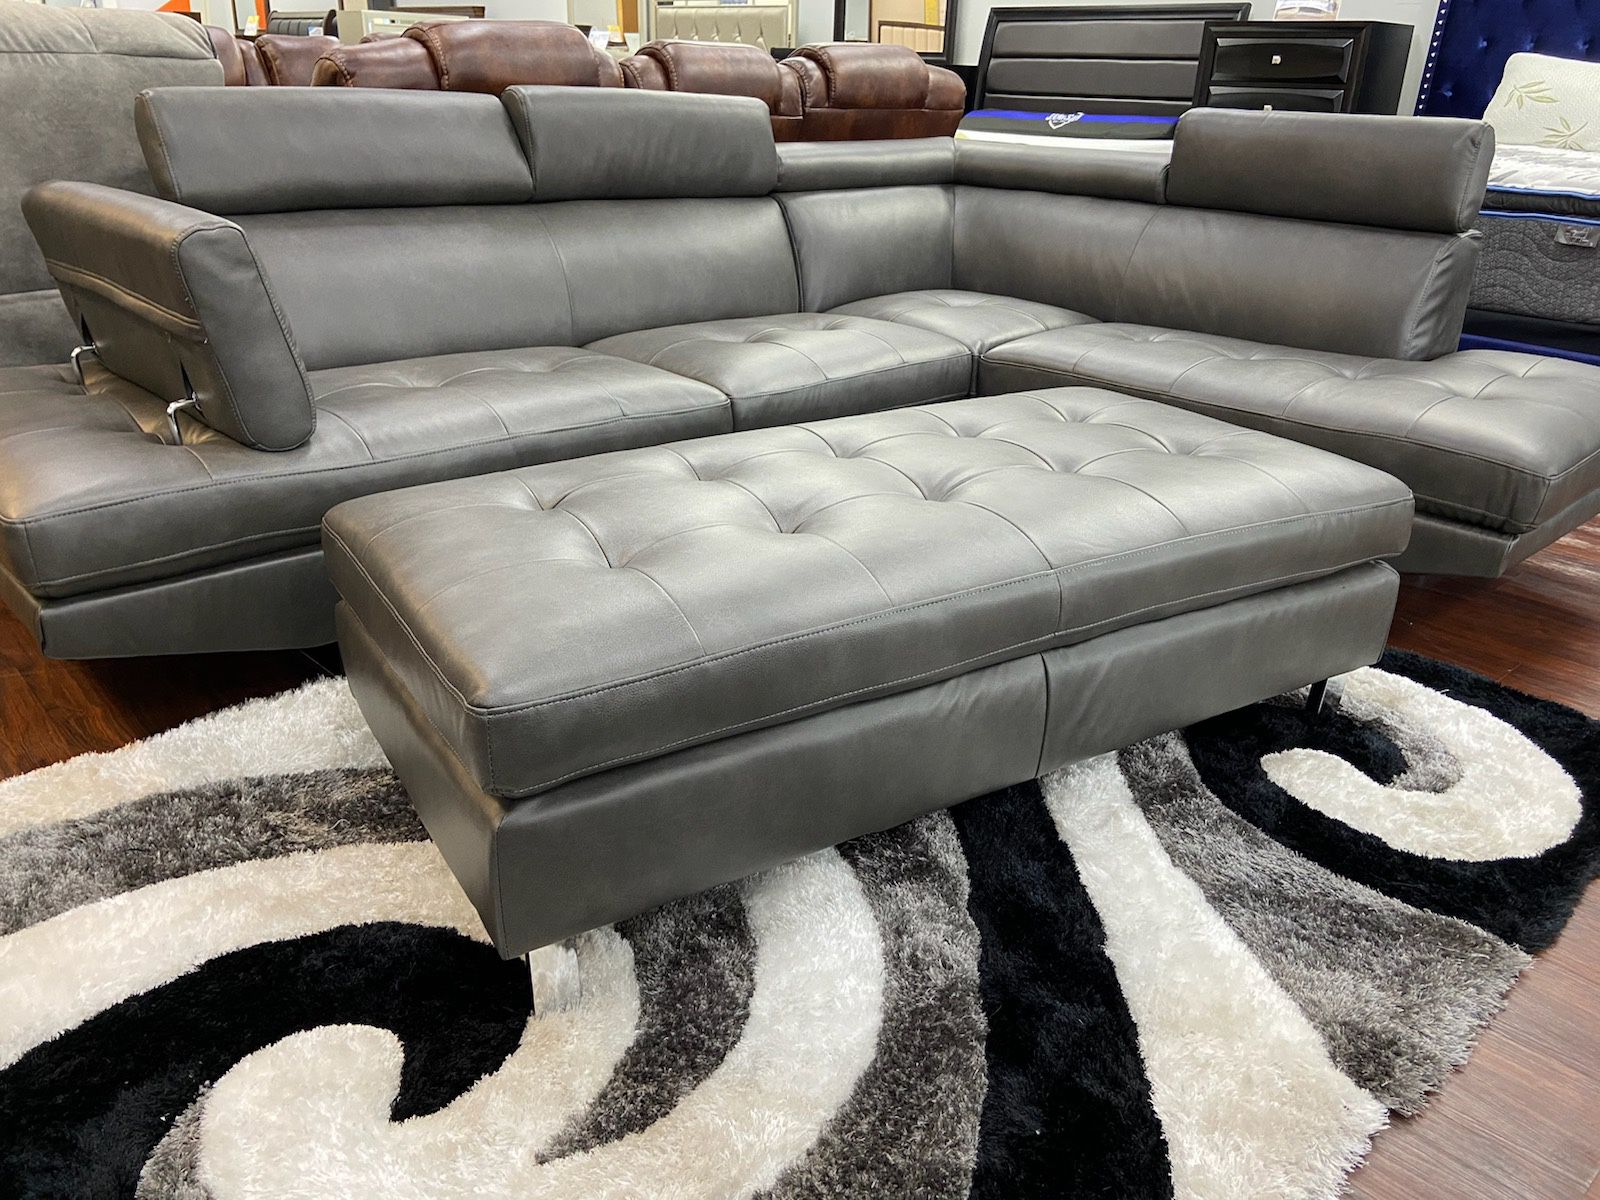 BEAUTIFUL GRAY IBIZA SECTIONAL SOFA!$699!*SAME DAY DELIVERY*NO CREDIT NEEDED*EASY FINANCING*HUGE SALE*